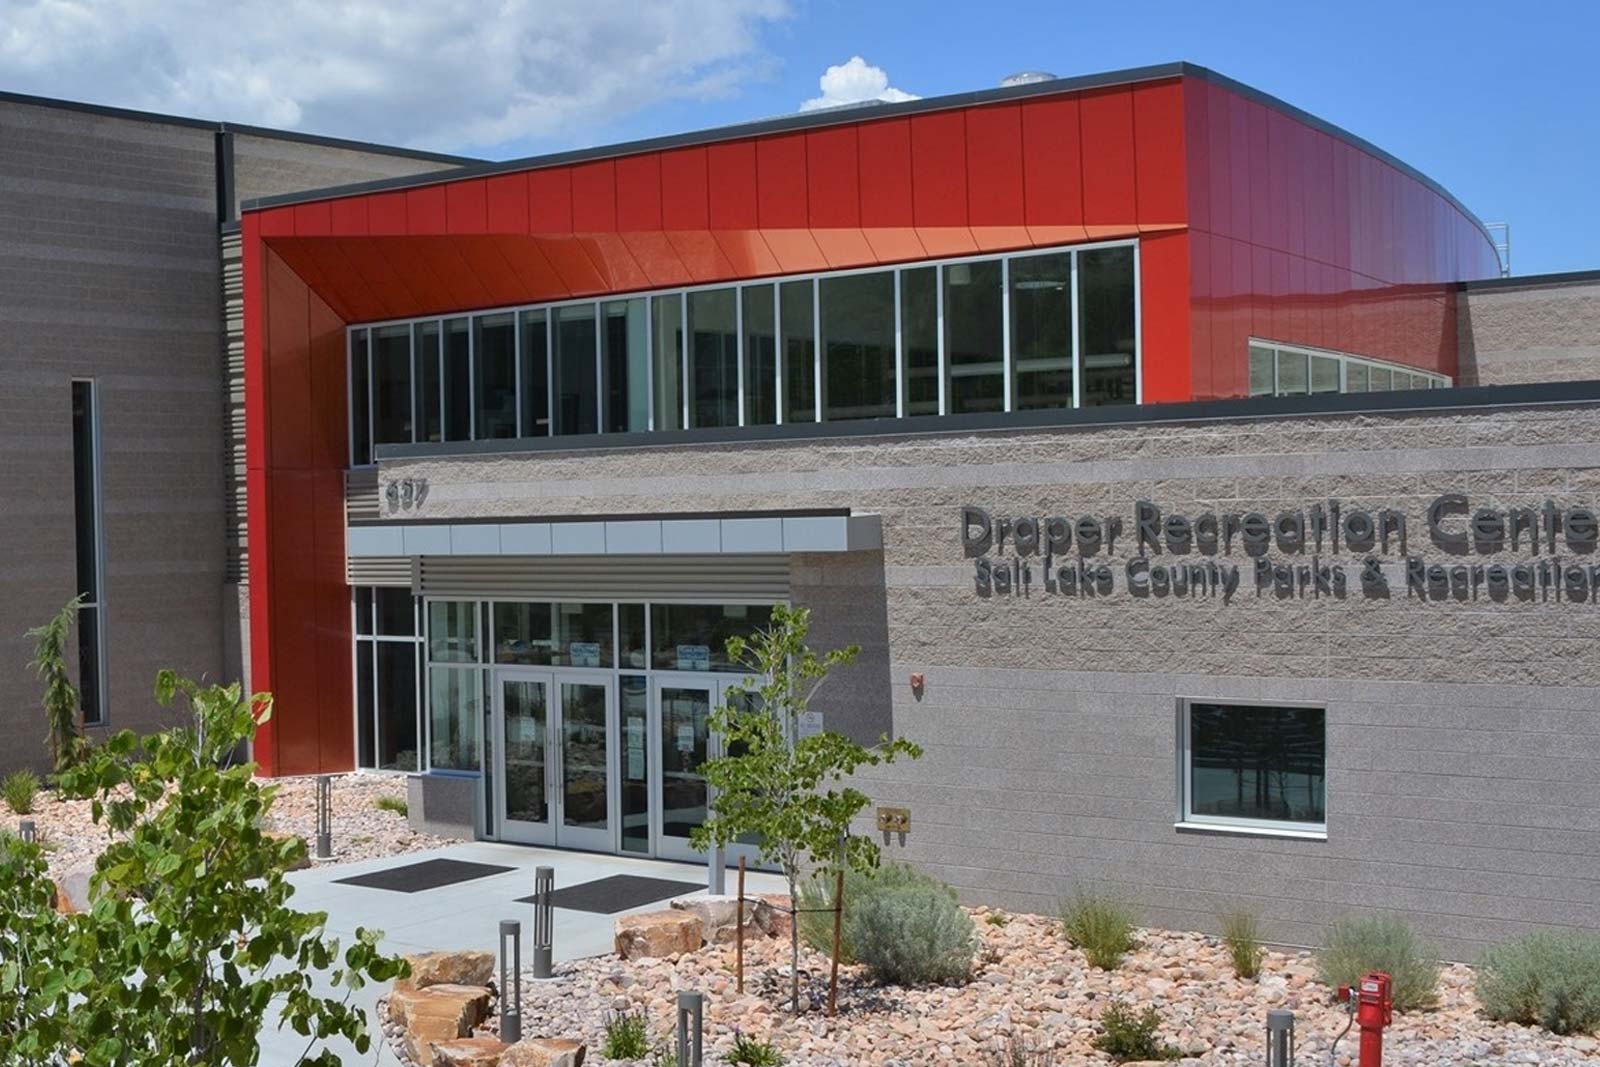 Front of Draper Recreaction Center building, a two story modern design